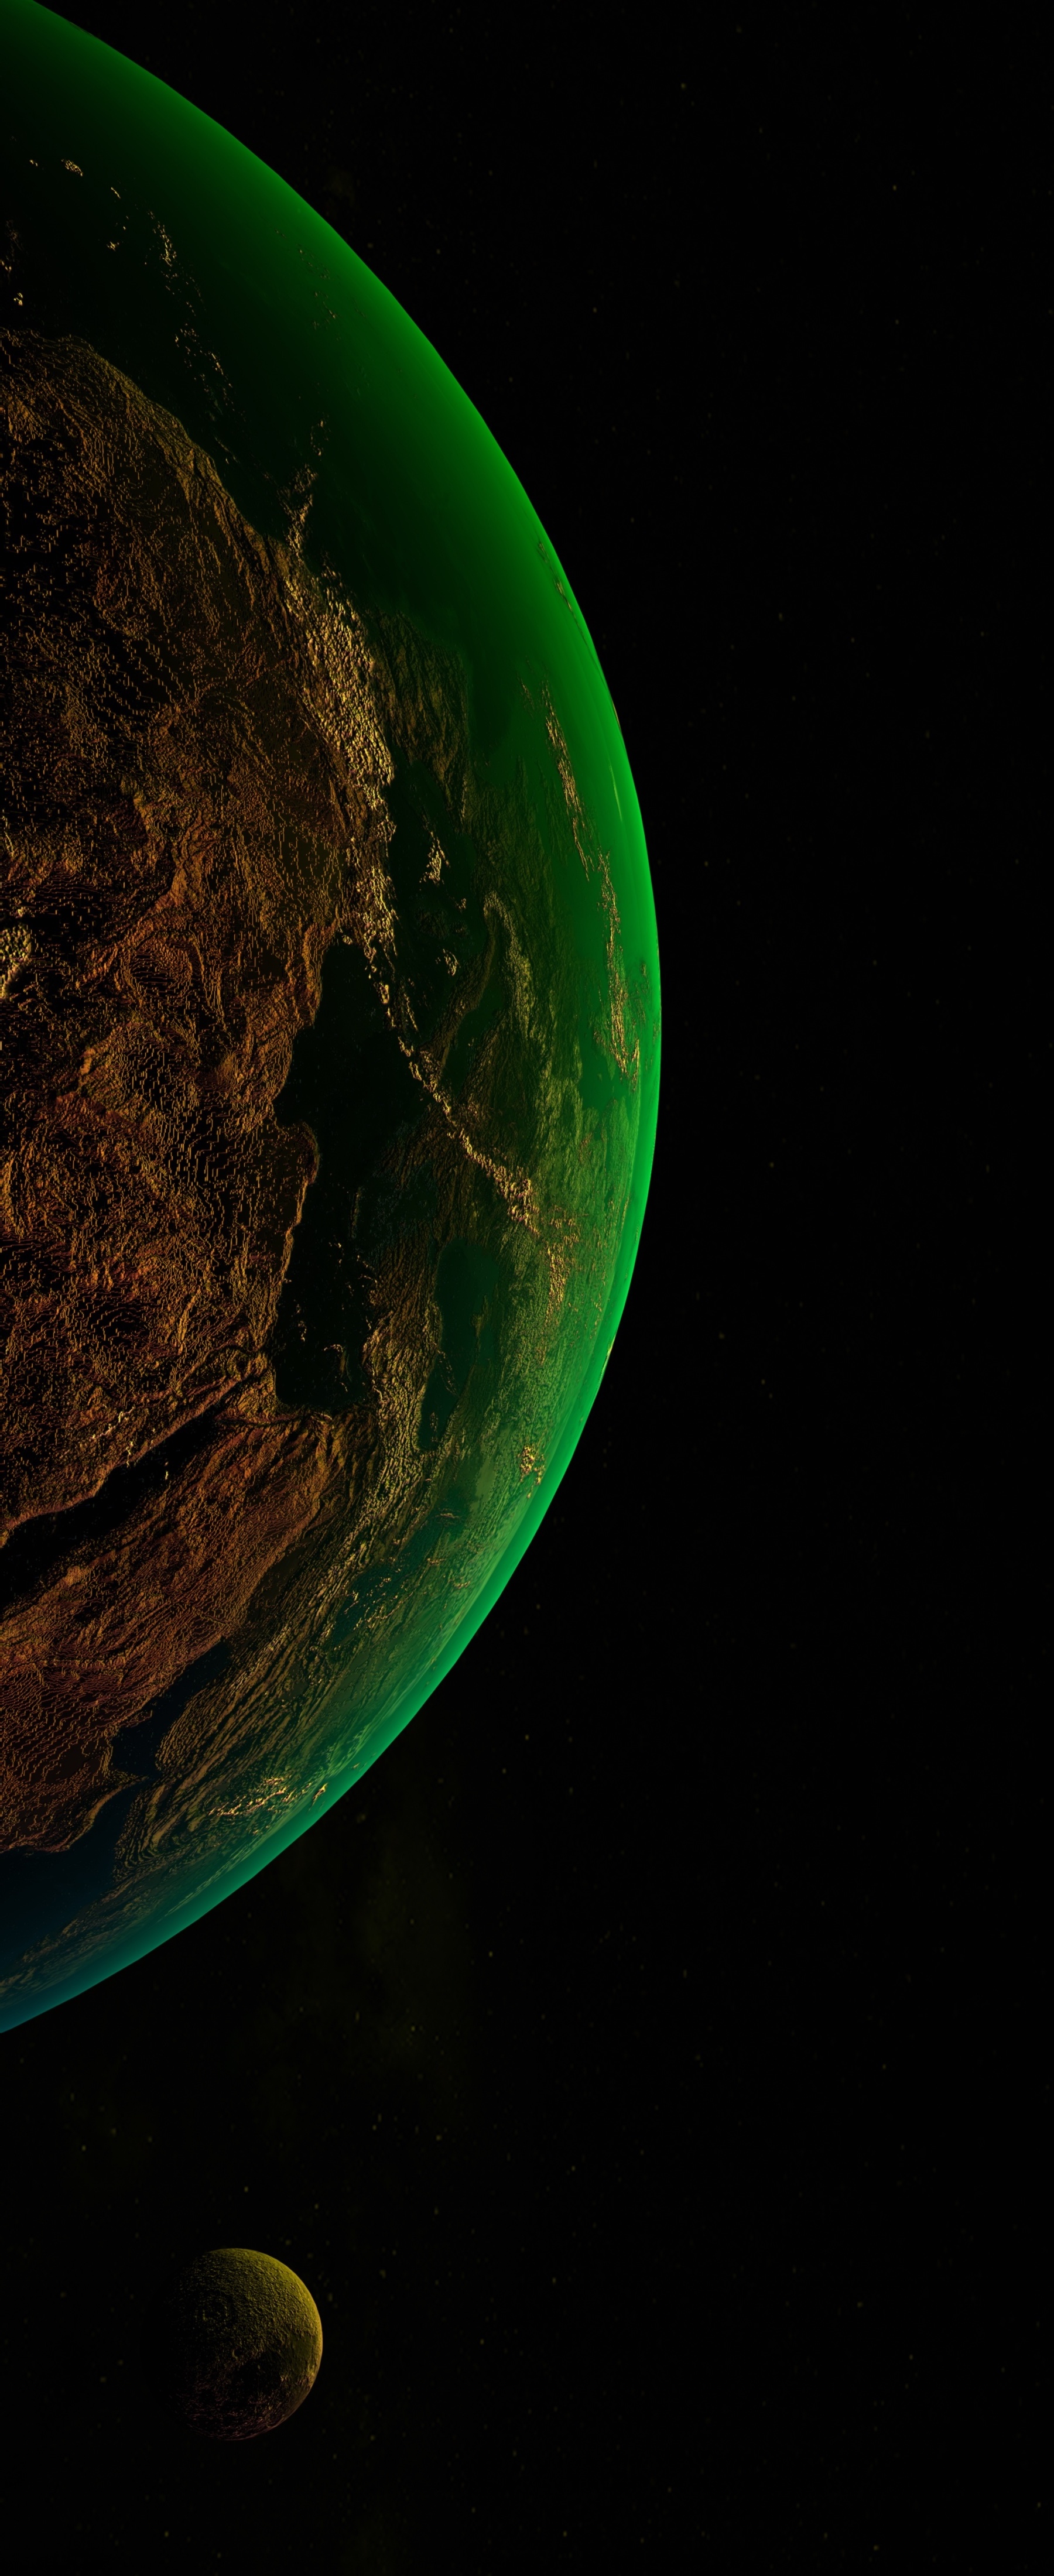 Download Earth wallpaper for mobile